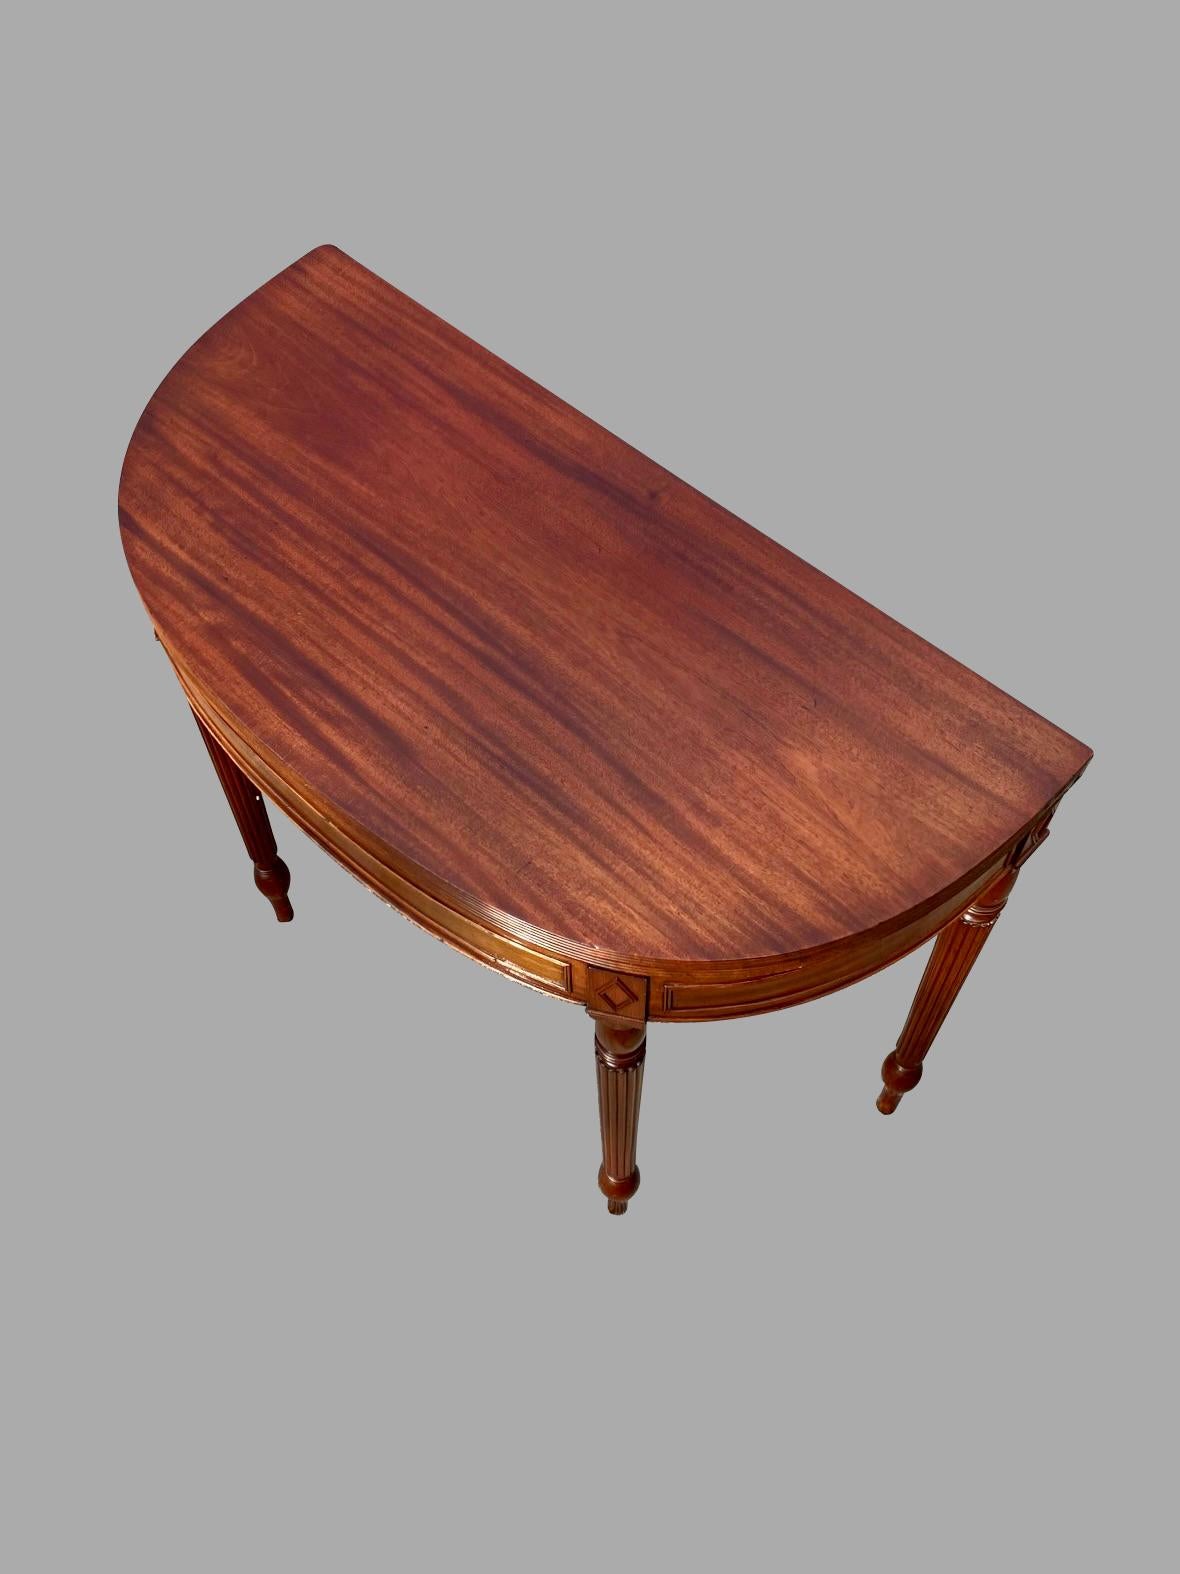 English Regency Period Mahogany Flip Top Game or Tea Table with Reeded Legs For Sale 9